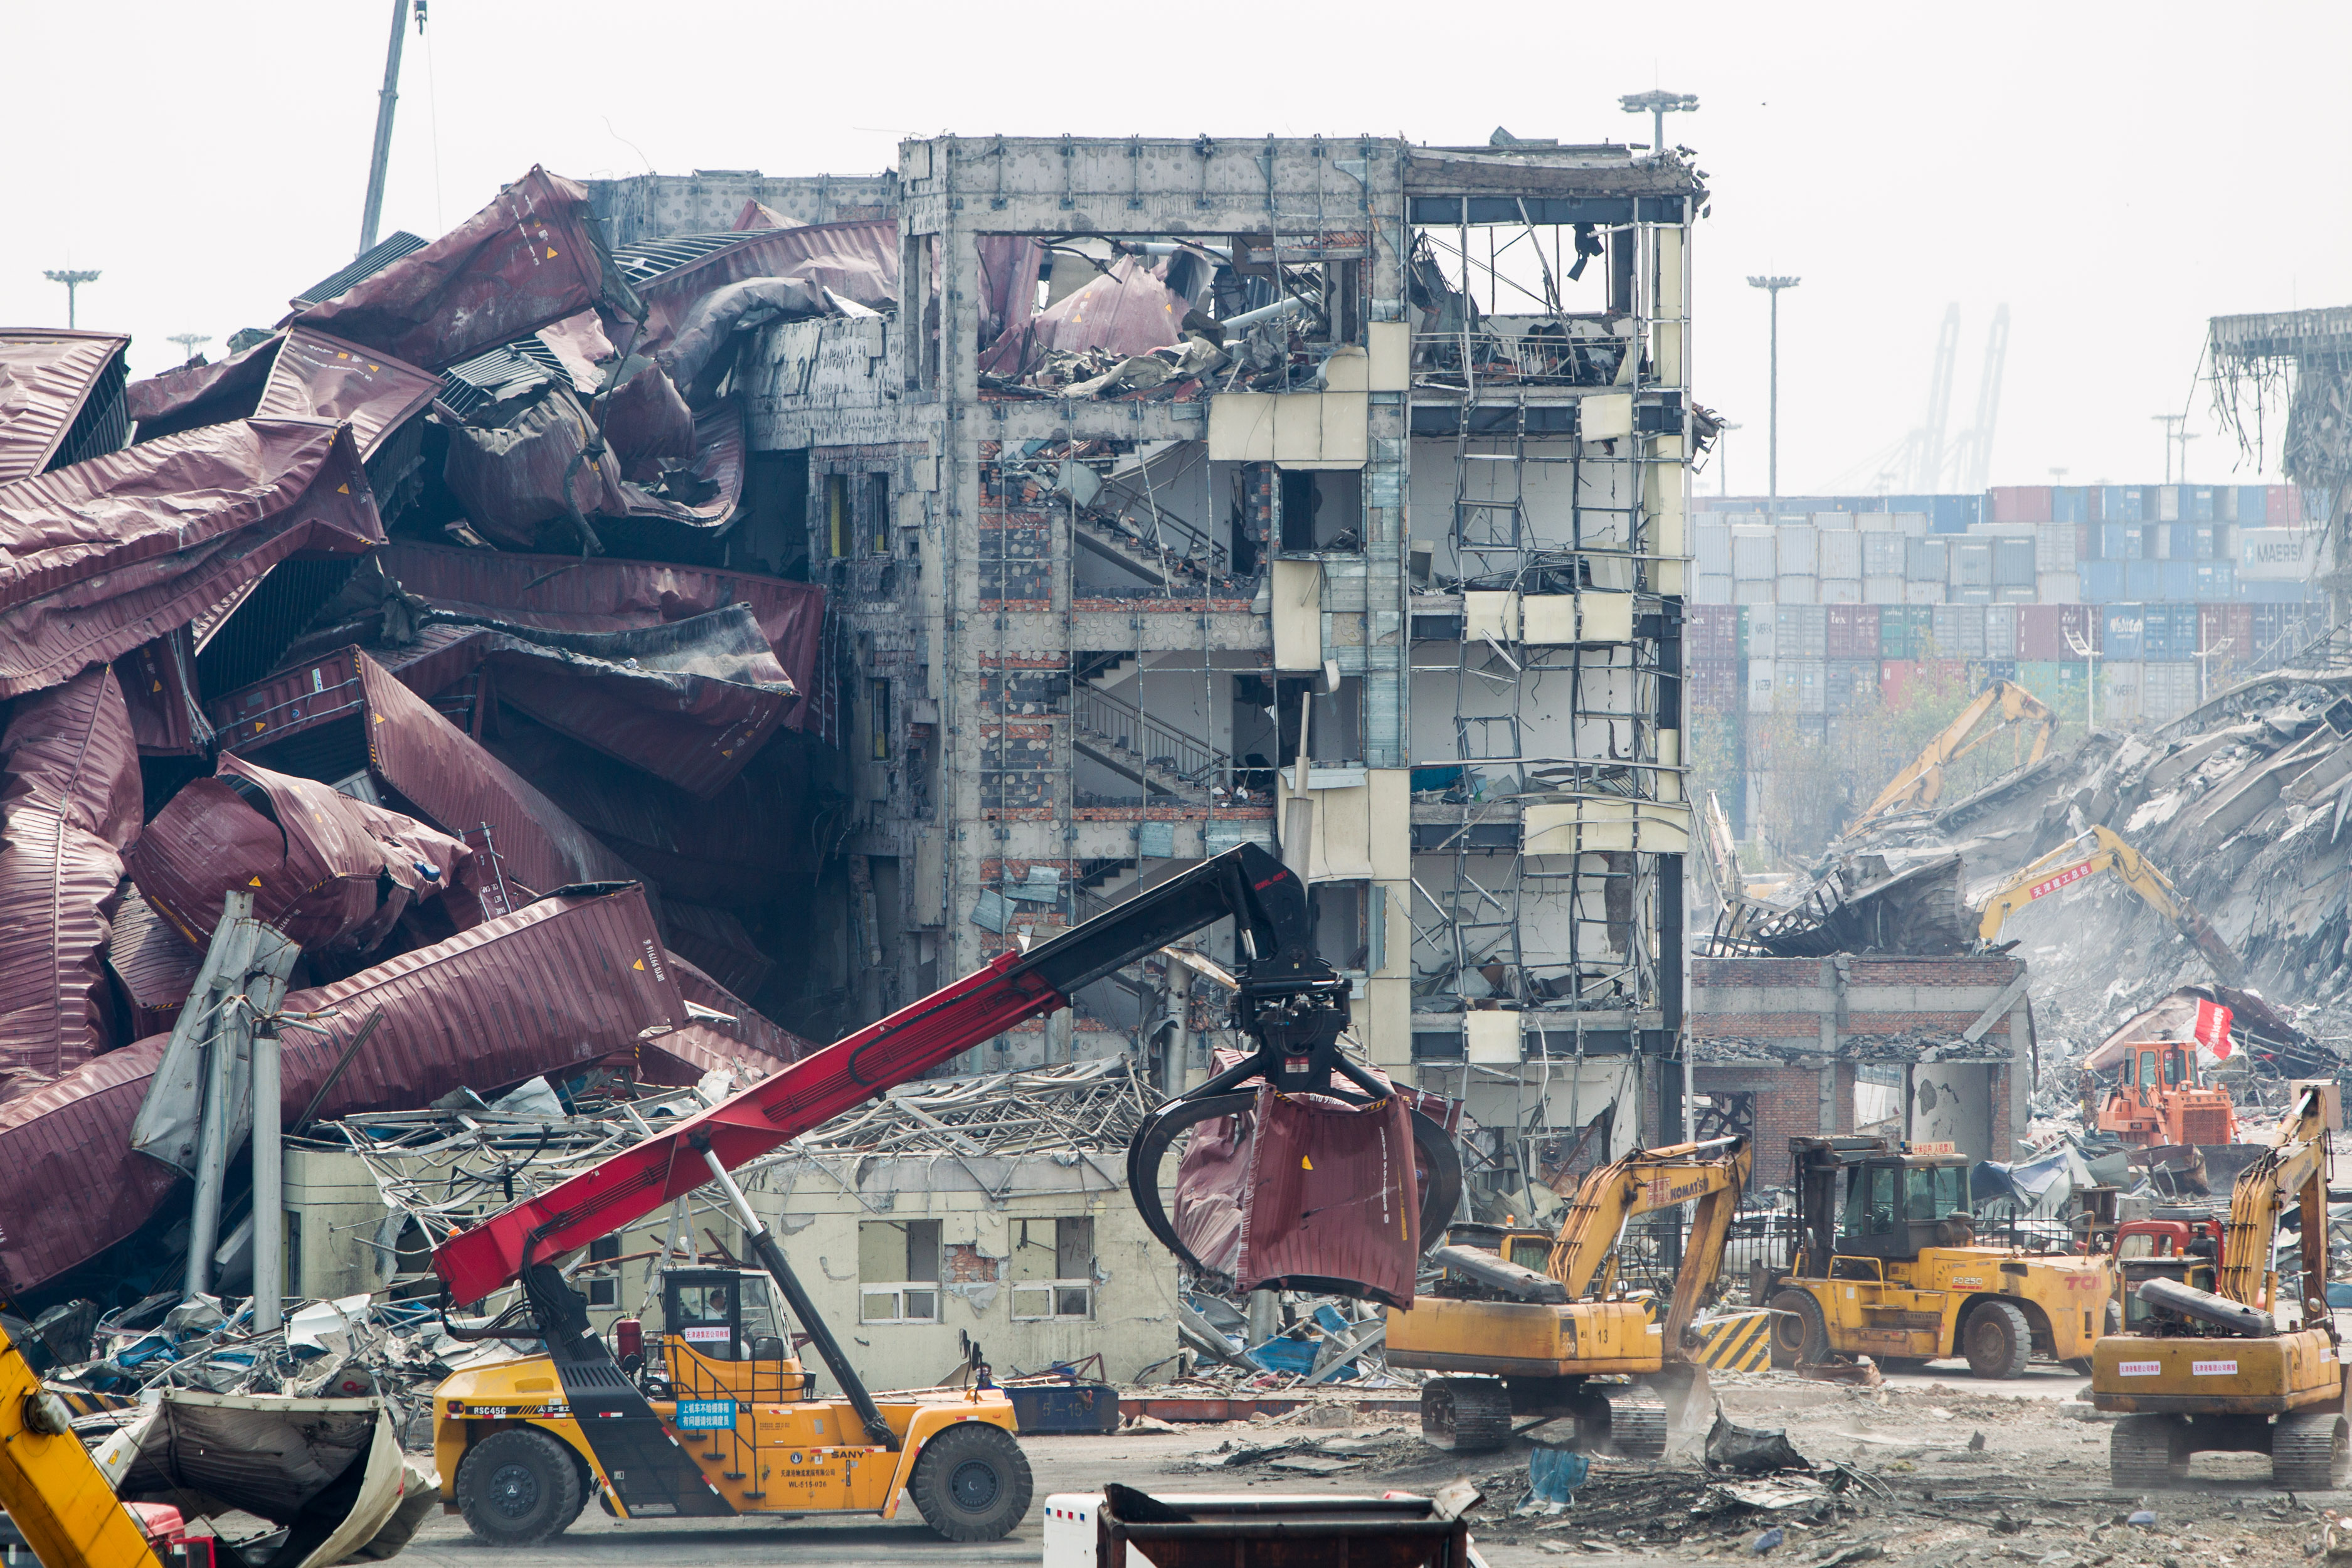 Rescuers clean up the blast site in Tianjin, north China. Photo: Xinhua